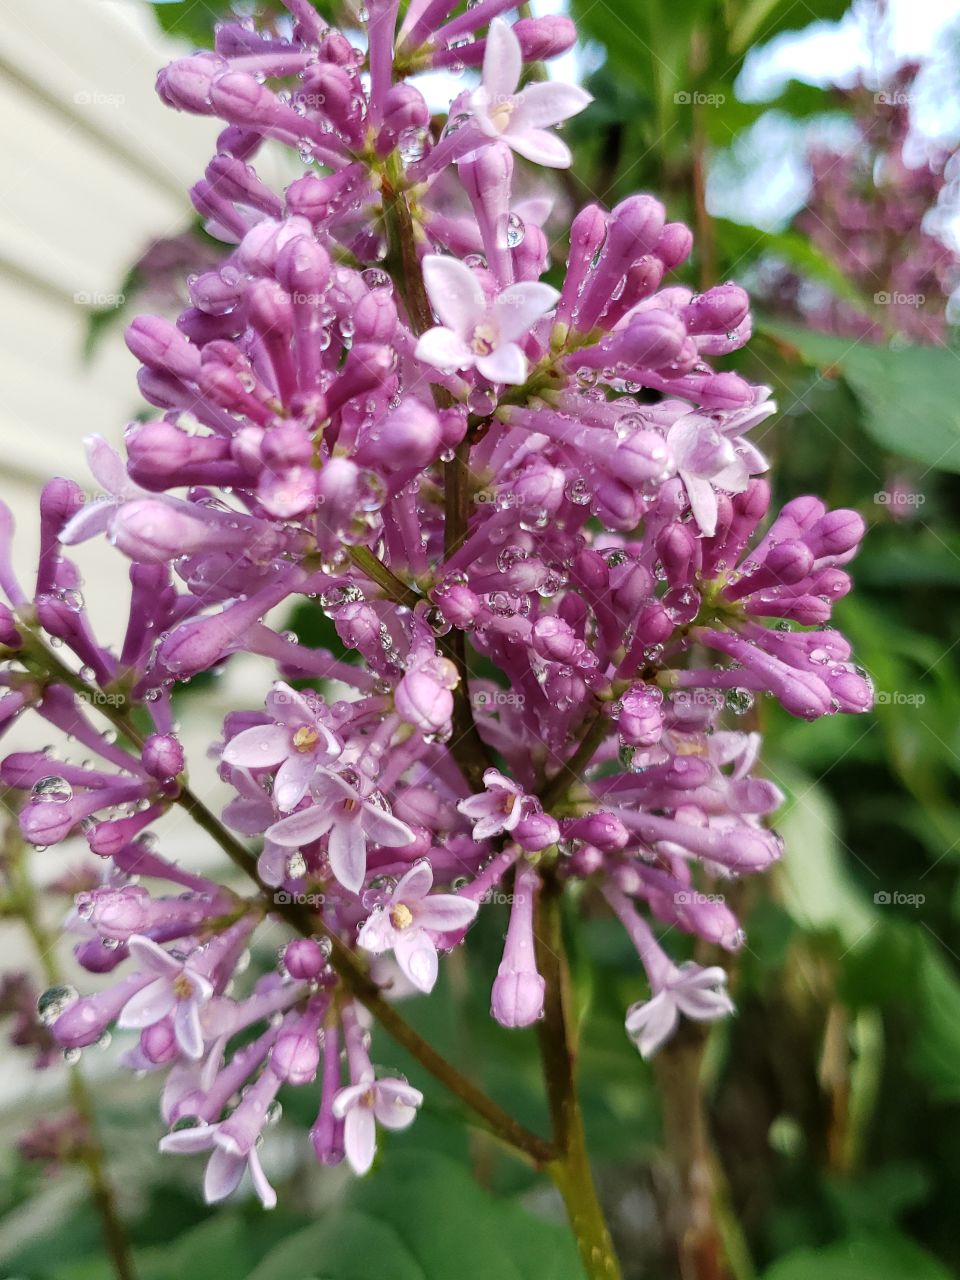 Lilacs after the rain